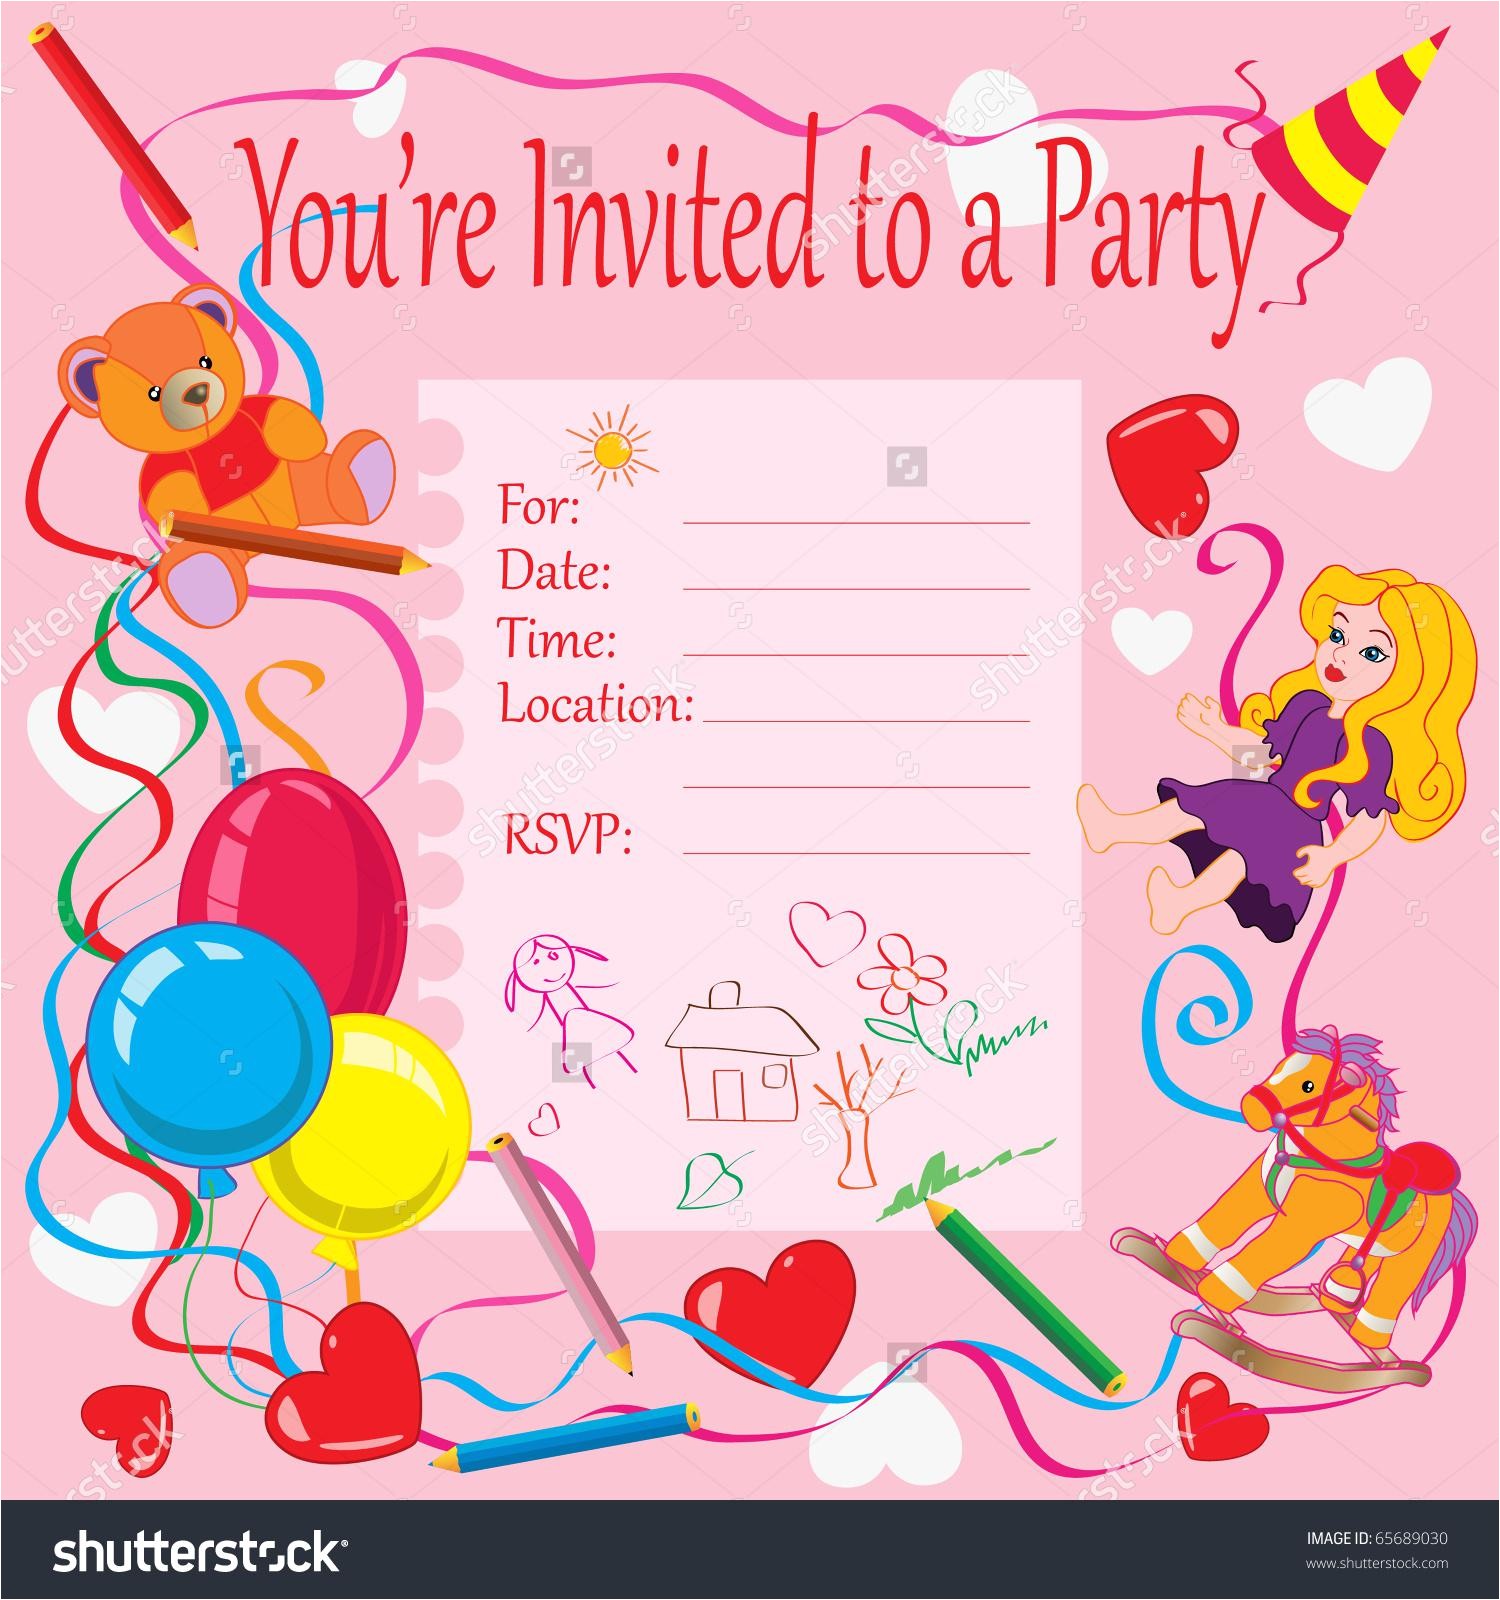 make your own birthday invitations